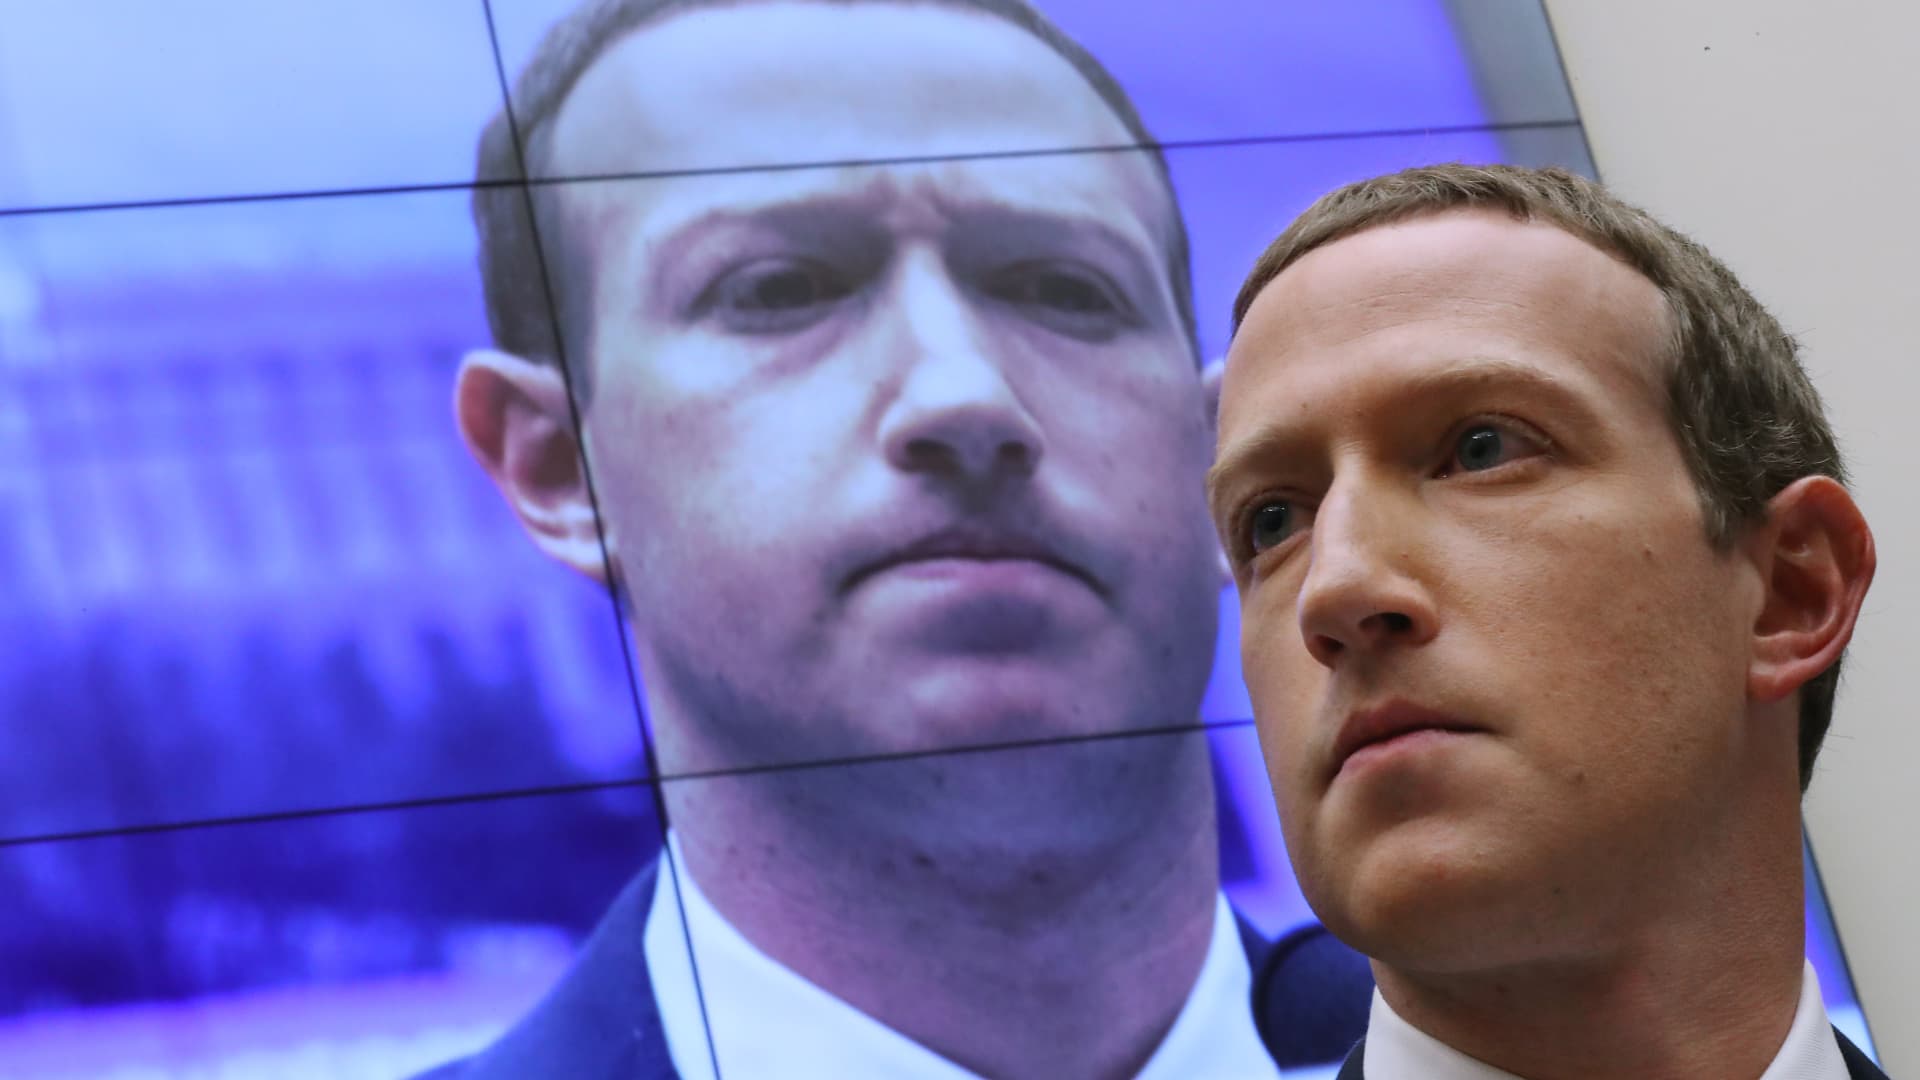 With an image of himself on a screen in the background, Facebook co-founder and CEO Mark Zuckerberg testifies before the House Financial Services Committee in the Rayburn House Office Building on Capitol Hill October 23, 2019 in Washington, DC.